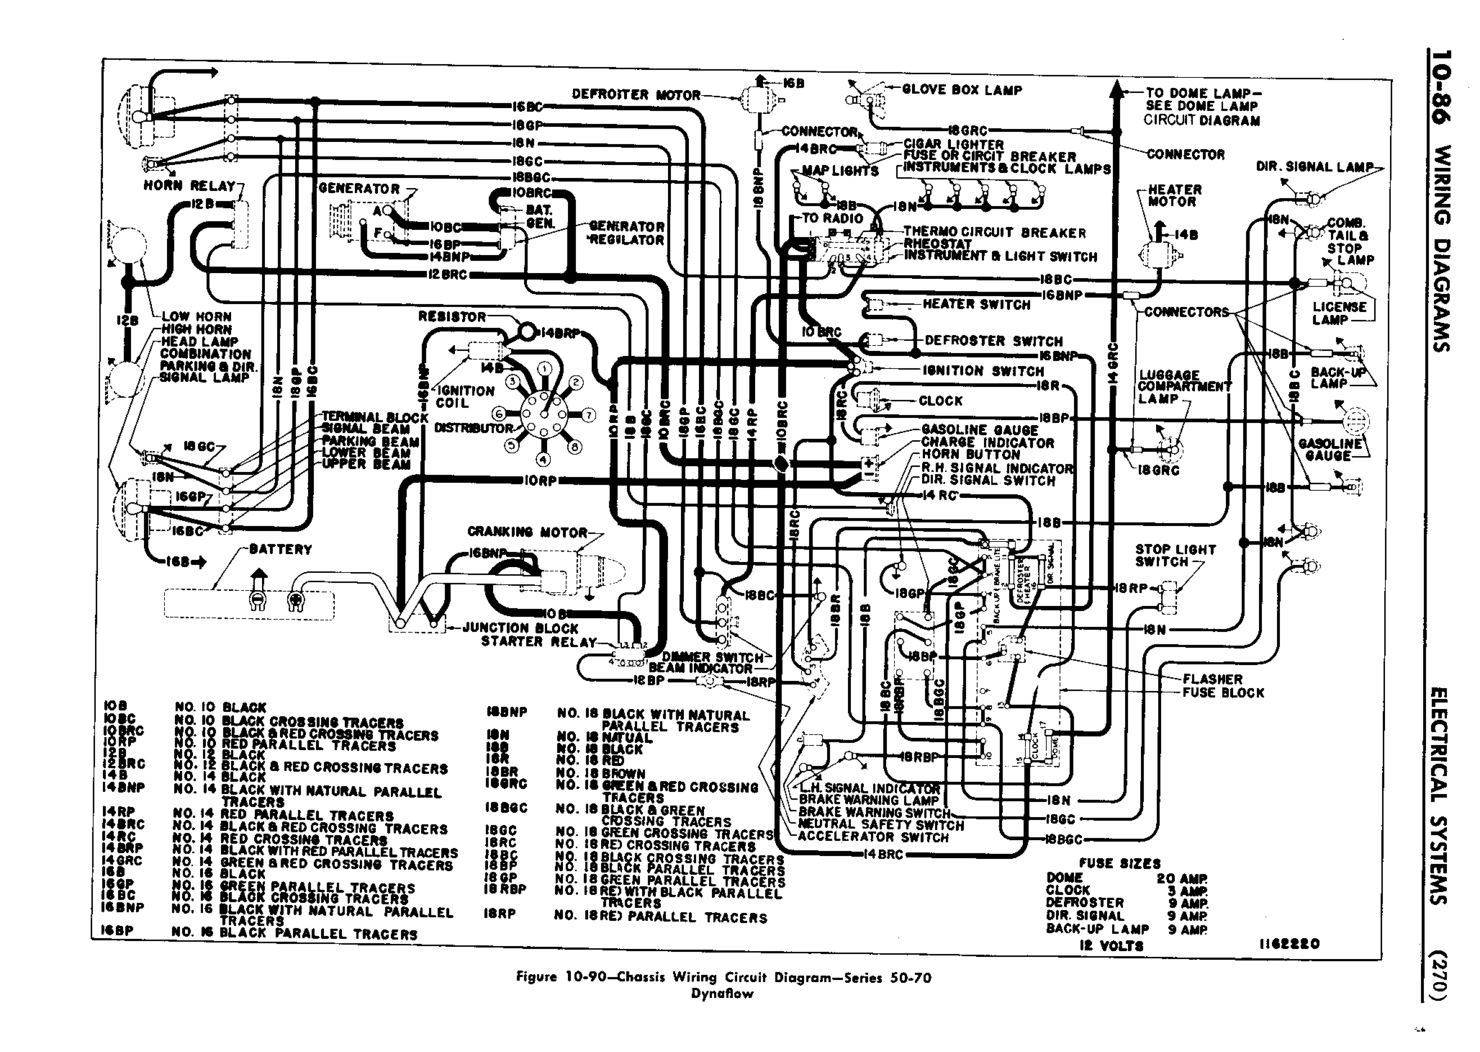 n_11 1953 Buick Shop Manual - Electrical Systems-087-087.jpg